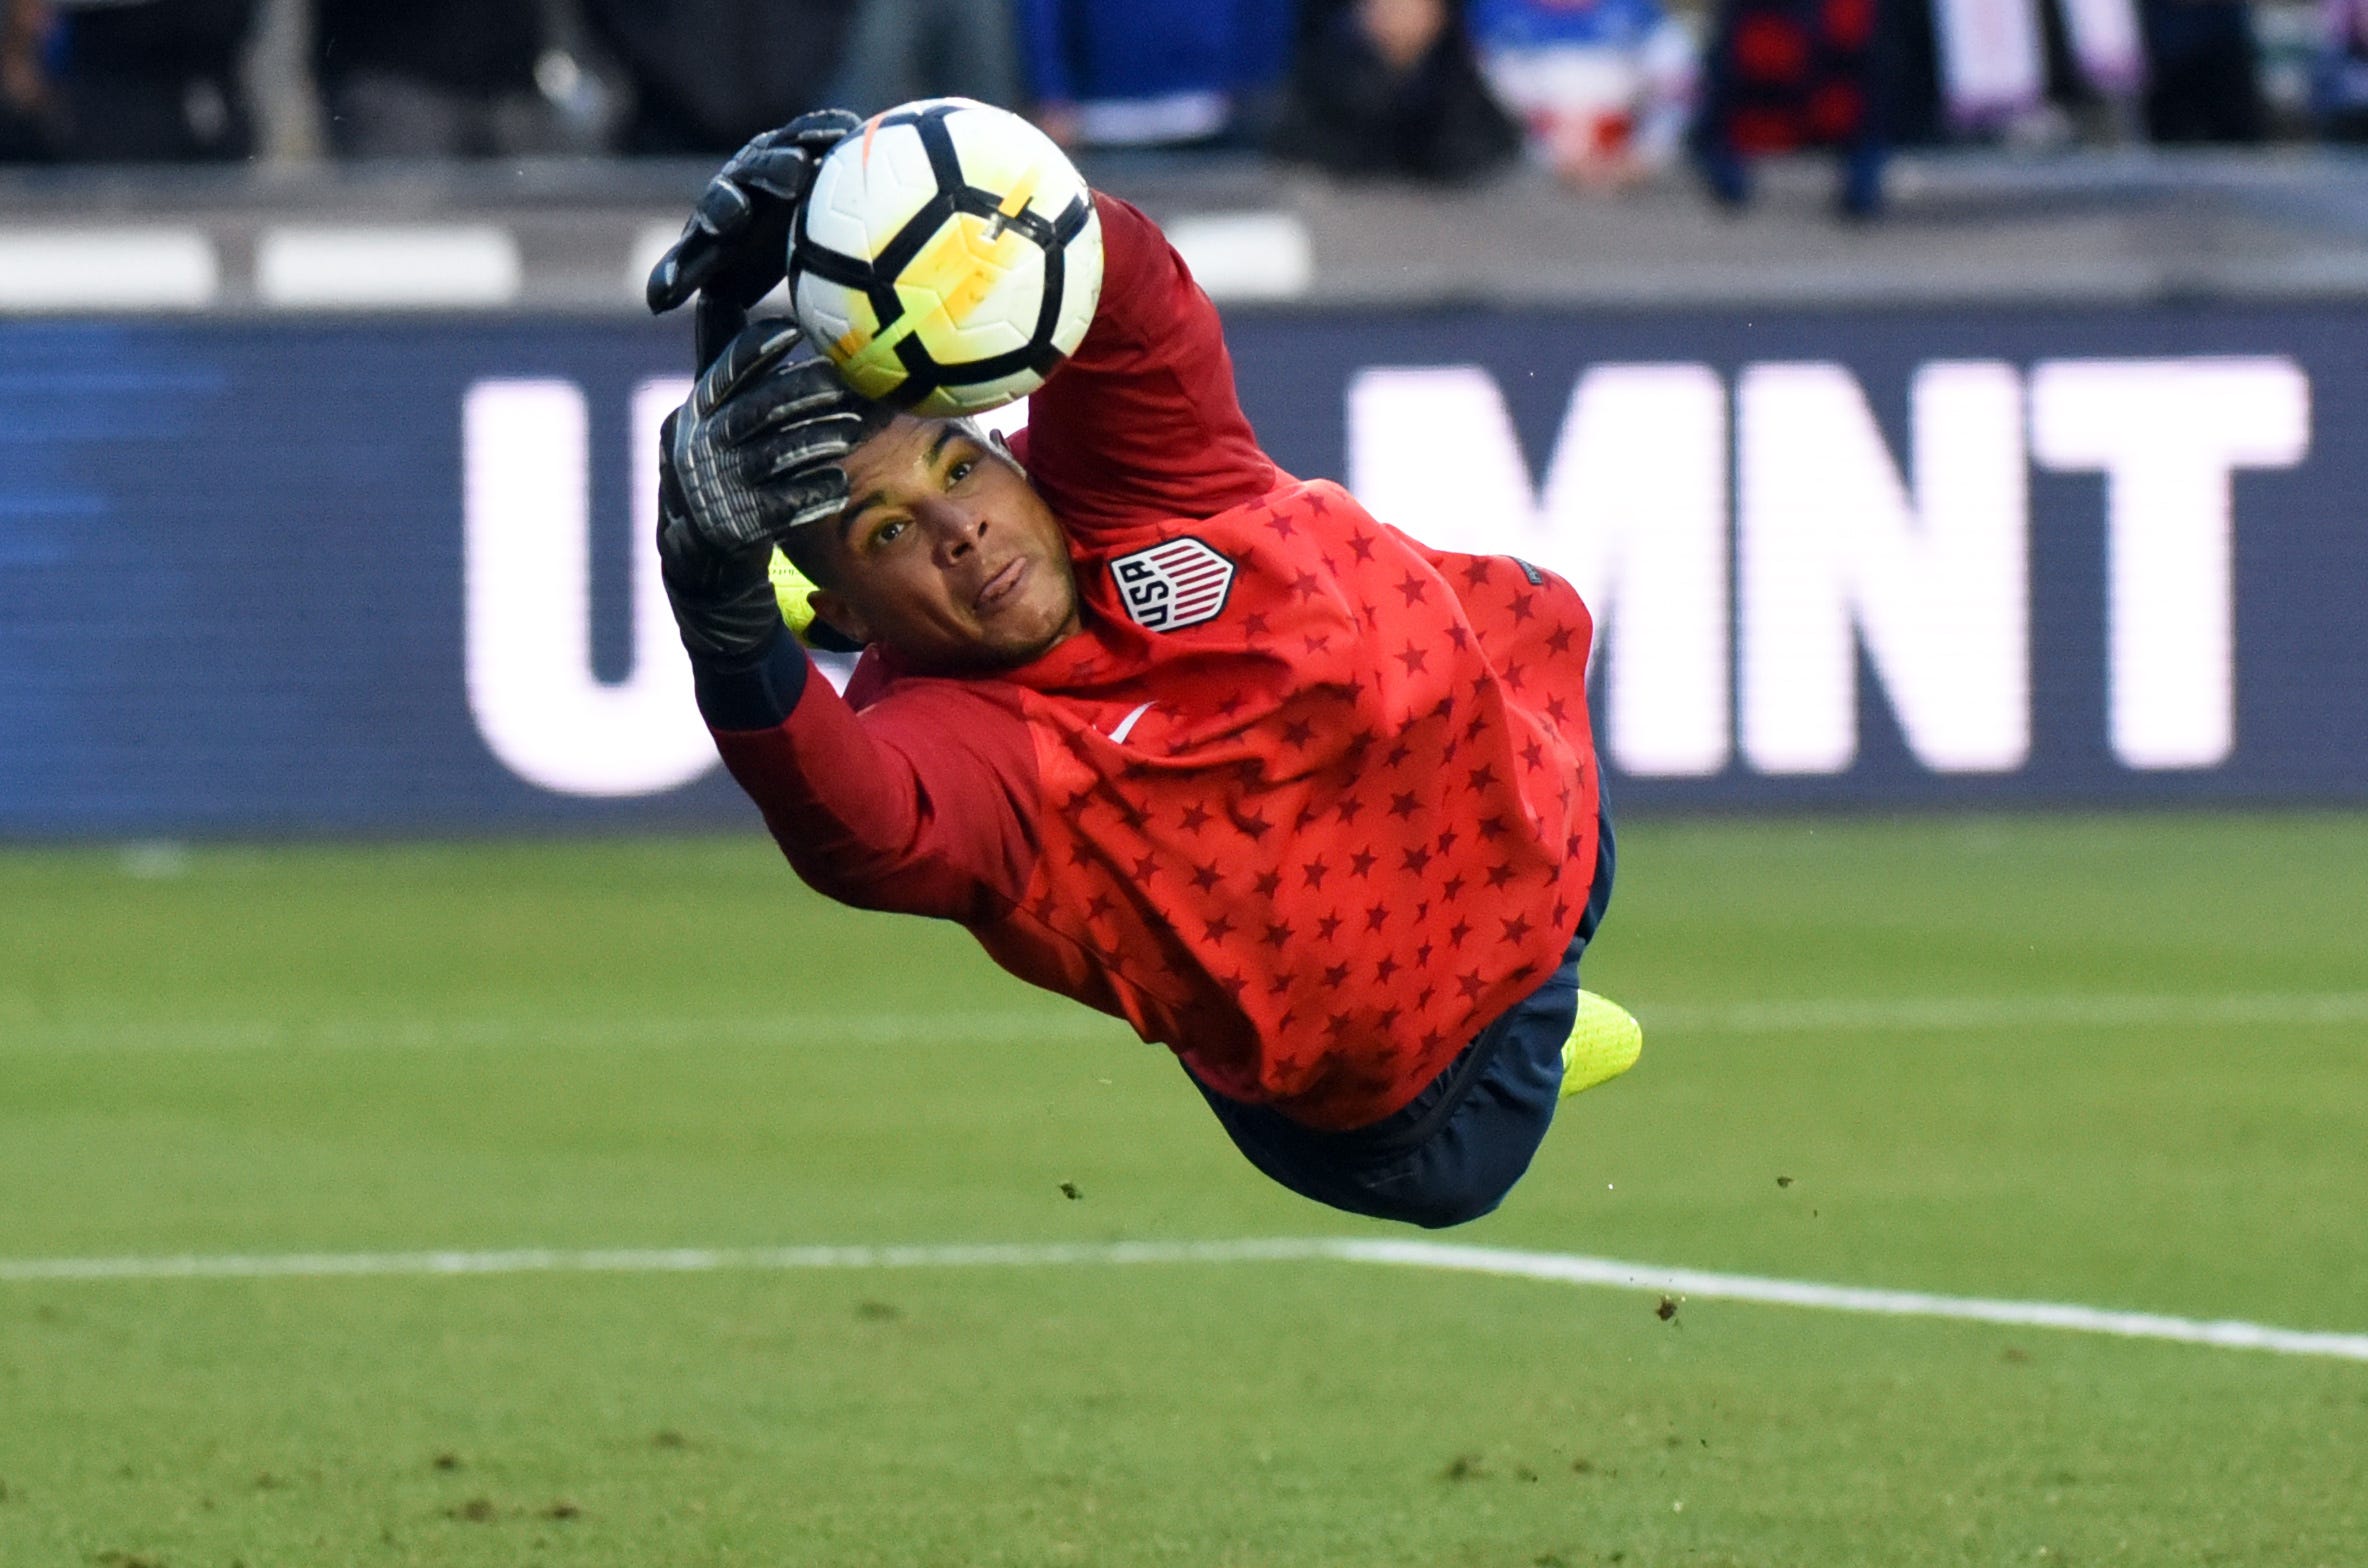 United States goalkeeper Zack Steffen warms up prior to an international friendly men's soccer match against Paraguay at WakeMed Soccer Park in Cary, N.C.